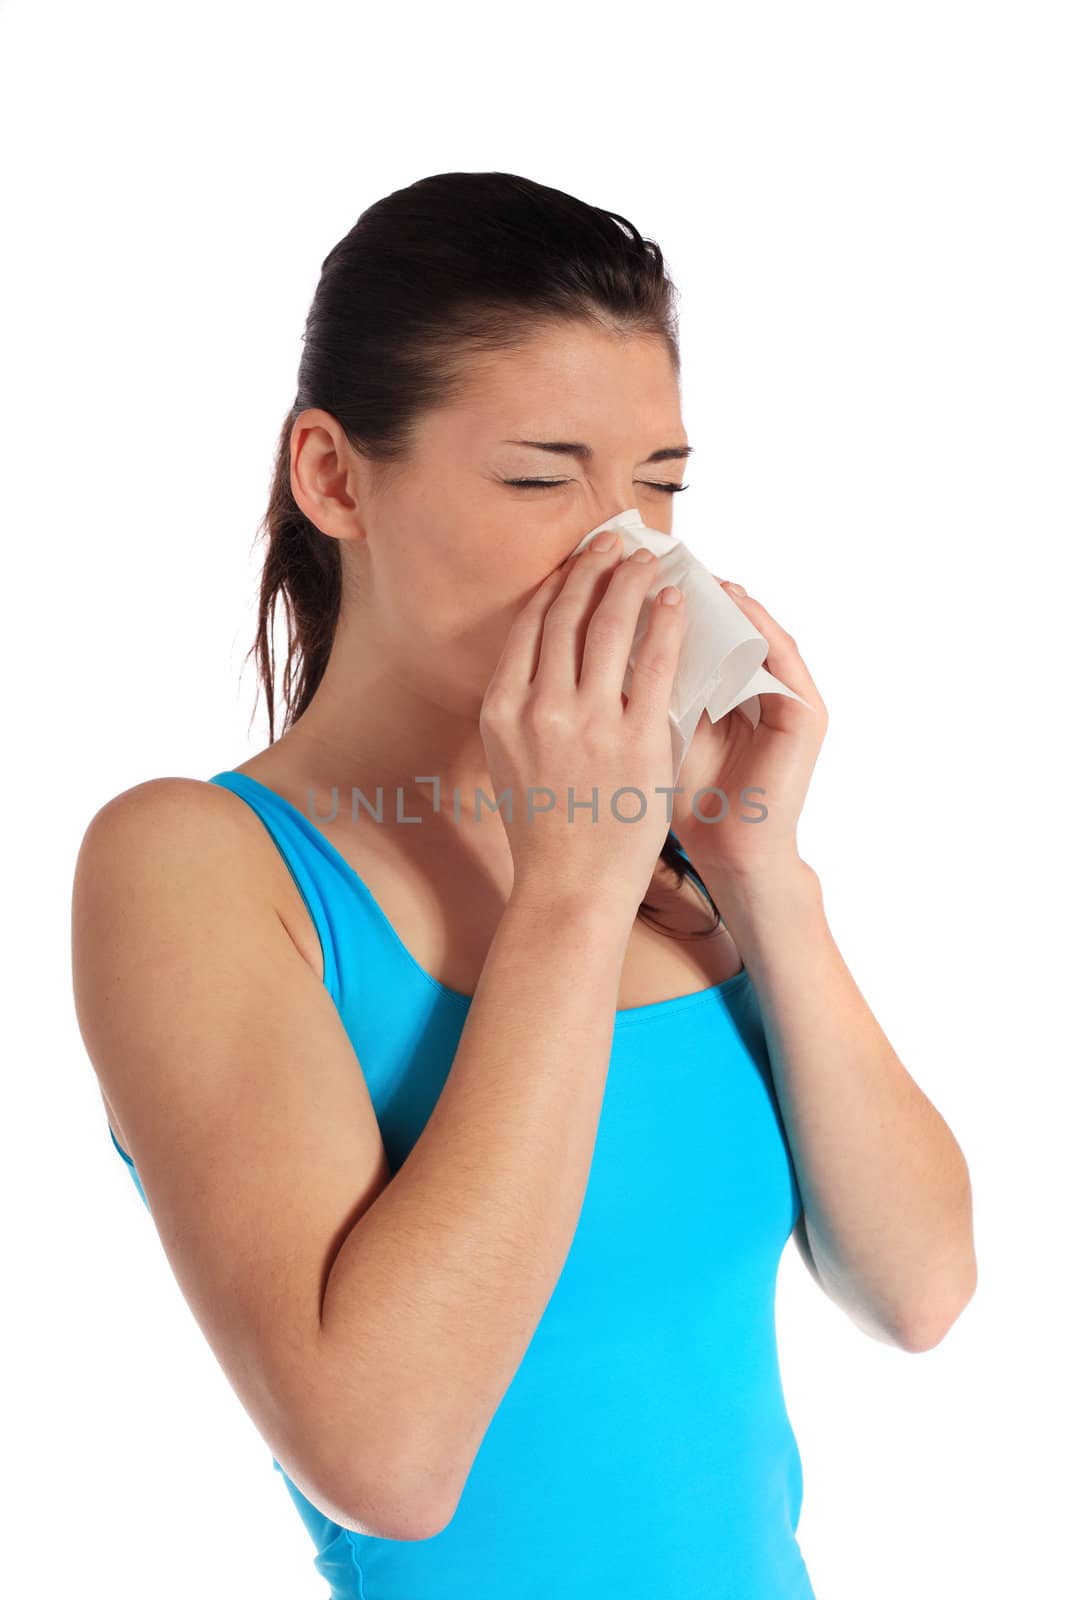 Attractive young woman using a tissue. All on white background.